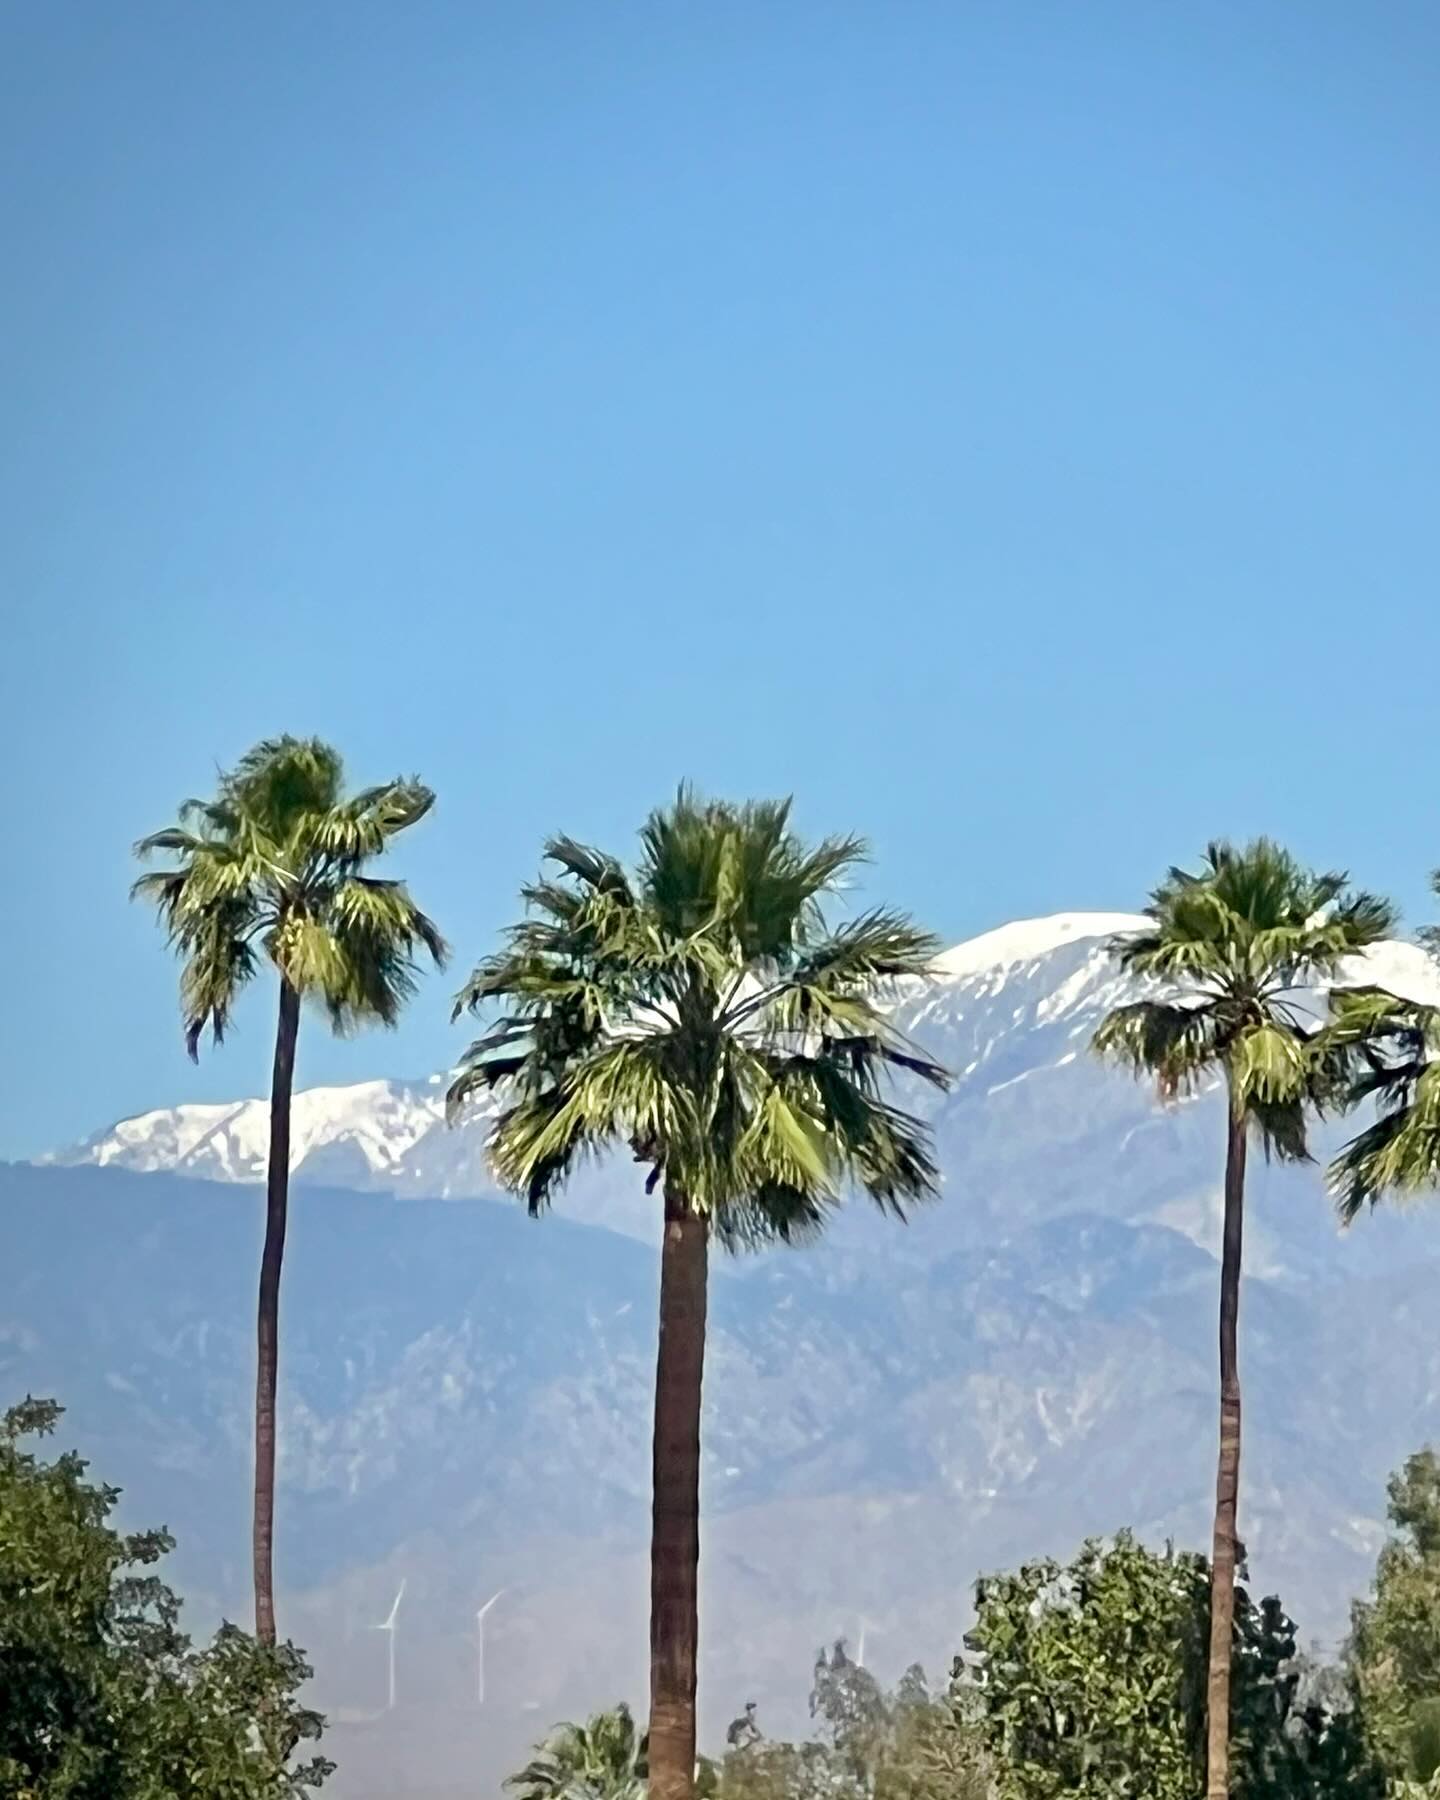 I’m moving to Palm Springs. 🌴 After 22 amazing years in Houston, I’m excited for a big change and fresh start.  I visited a few weeks ago only to look at places, but I found a perfect apartment with great location, good price and a stellar view of the mountains. I’ll be fully there by the end of this month. I anticipate incredible content opportunities - in both Palm Springs and Los Angeles. And, I really look forward to new friends and becoming an active participant in the community there. While I’m so thrilled, uprooting after being here decades is gonna be tough. 😭 So your positive thoughts and good energy are especially appreciated during the transition. I’d like to give a special shout-out to the late, great @jayjorgensenphoto who took the professional pics attached to this post. #palmsprings #speedo #moving #lifechanging #houston #community